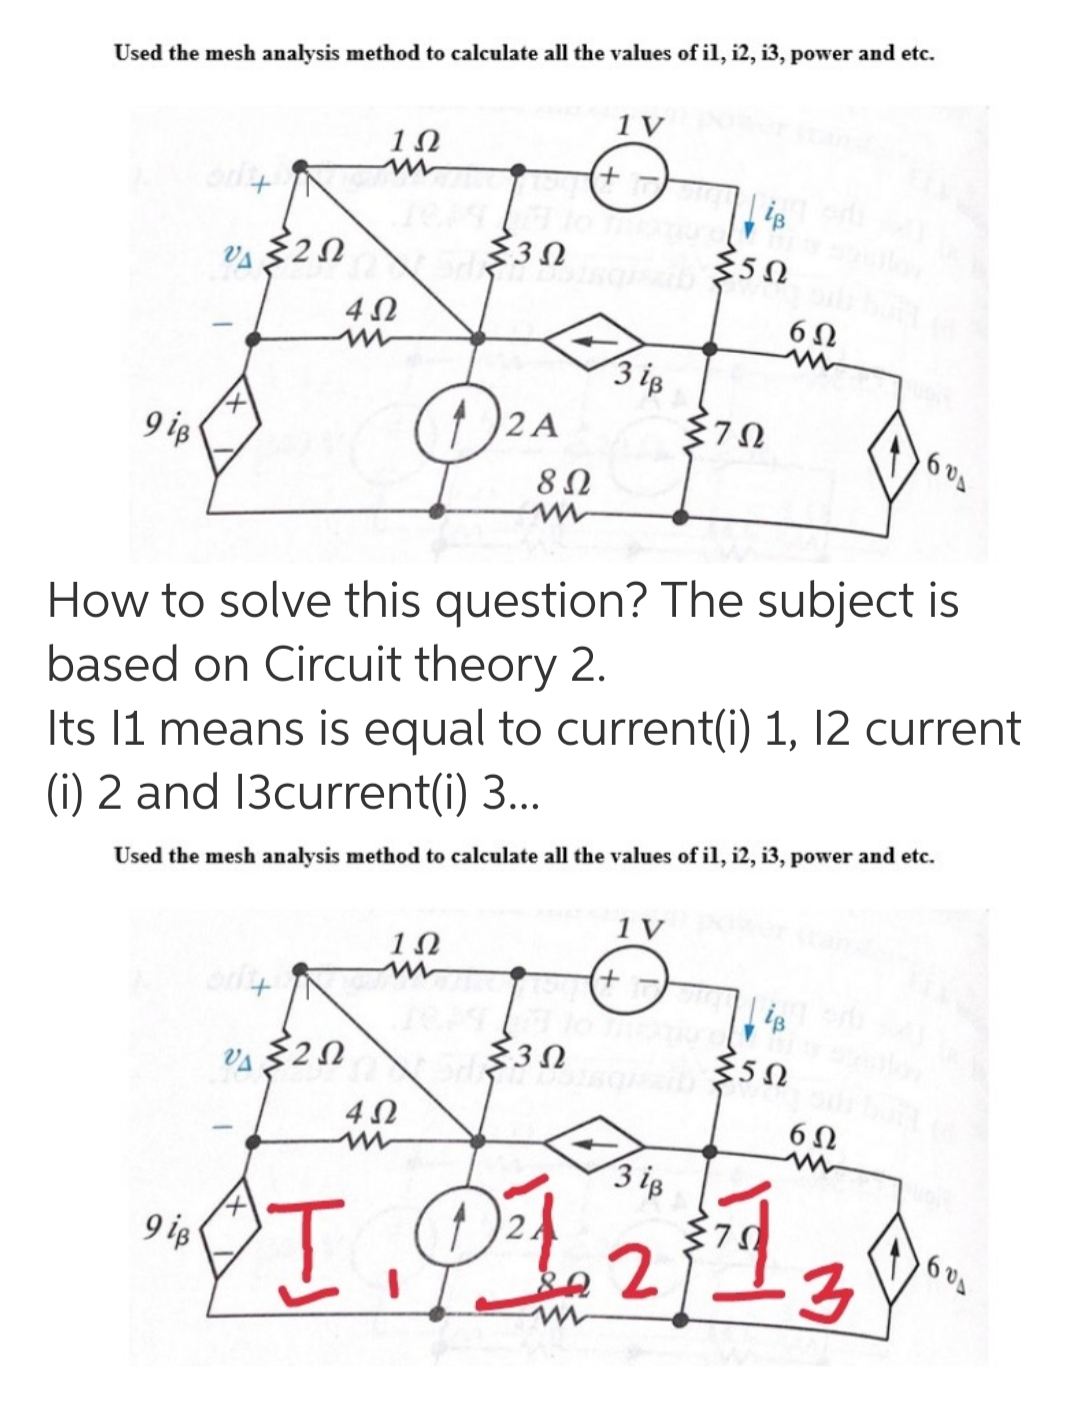 Used the mesh analysis method to calculate all the values of il, i2, i3, power and etc.
1 V
+,
40
6Ω
3 iß
9 is
2 A
60
How to solve this question? The subject is
based on Circuit theory 2.
Its 11 means is equal to current(i) 1, 12 current
(i) 2 and 13current(i) 3..
Used the mesh analysis method to calculate all the values of il, i2, i3, power and etc.
1 V
+,
3 is
I.
9 ip
